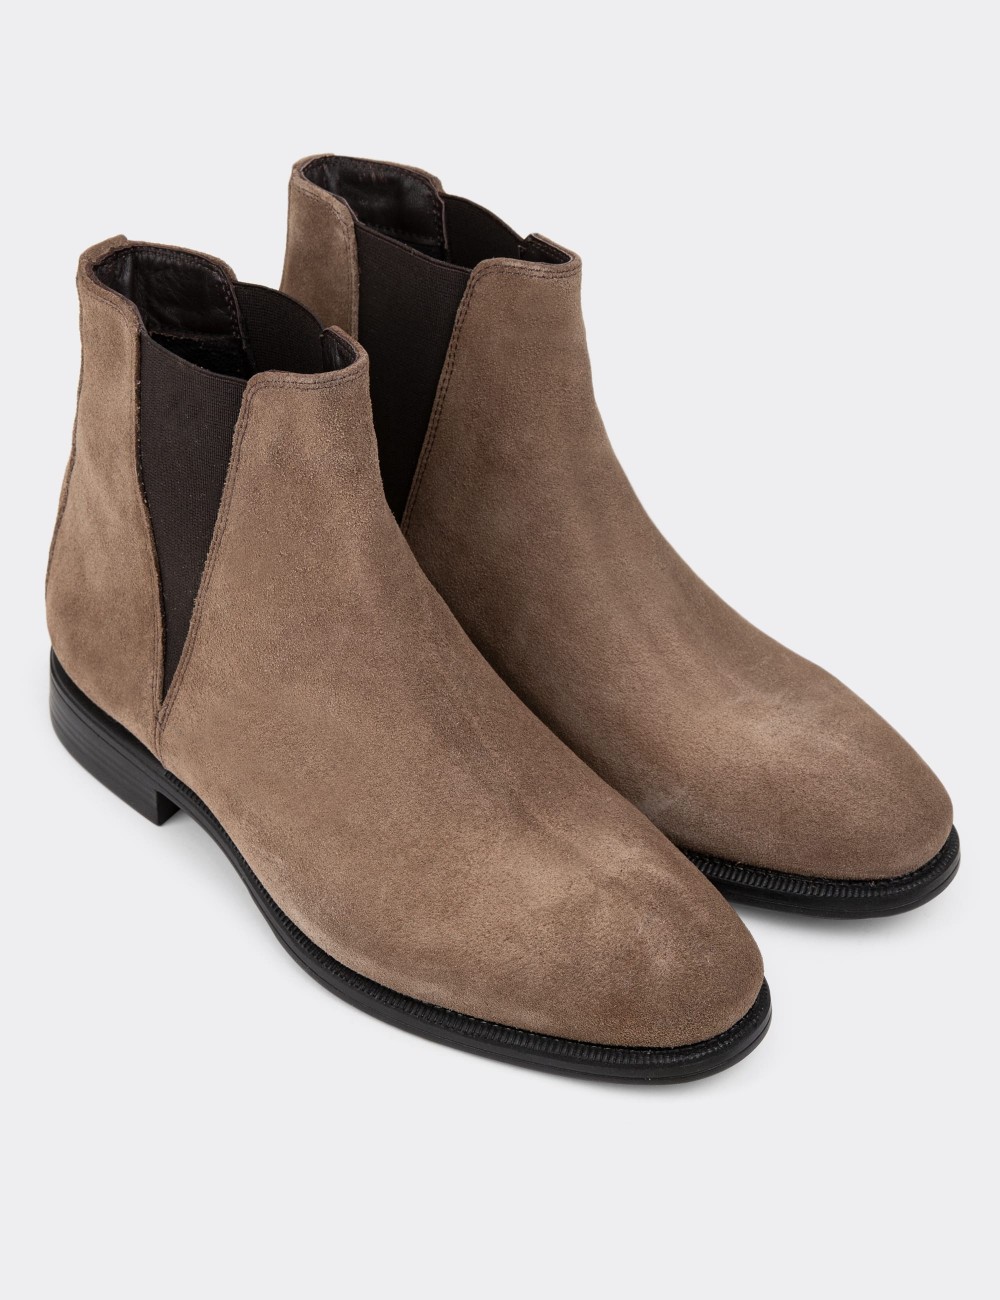 Sandstone Suede Leather Chelsea Boots - 01689MVZNC01